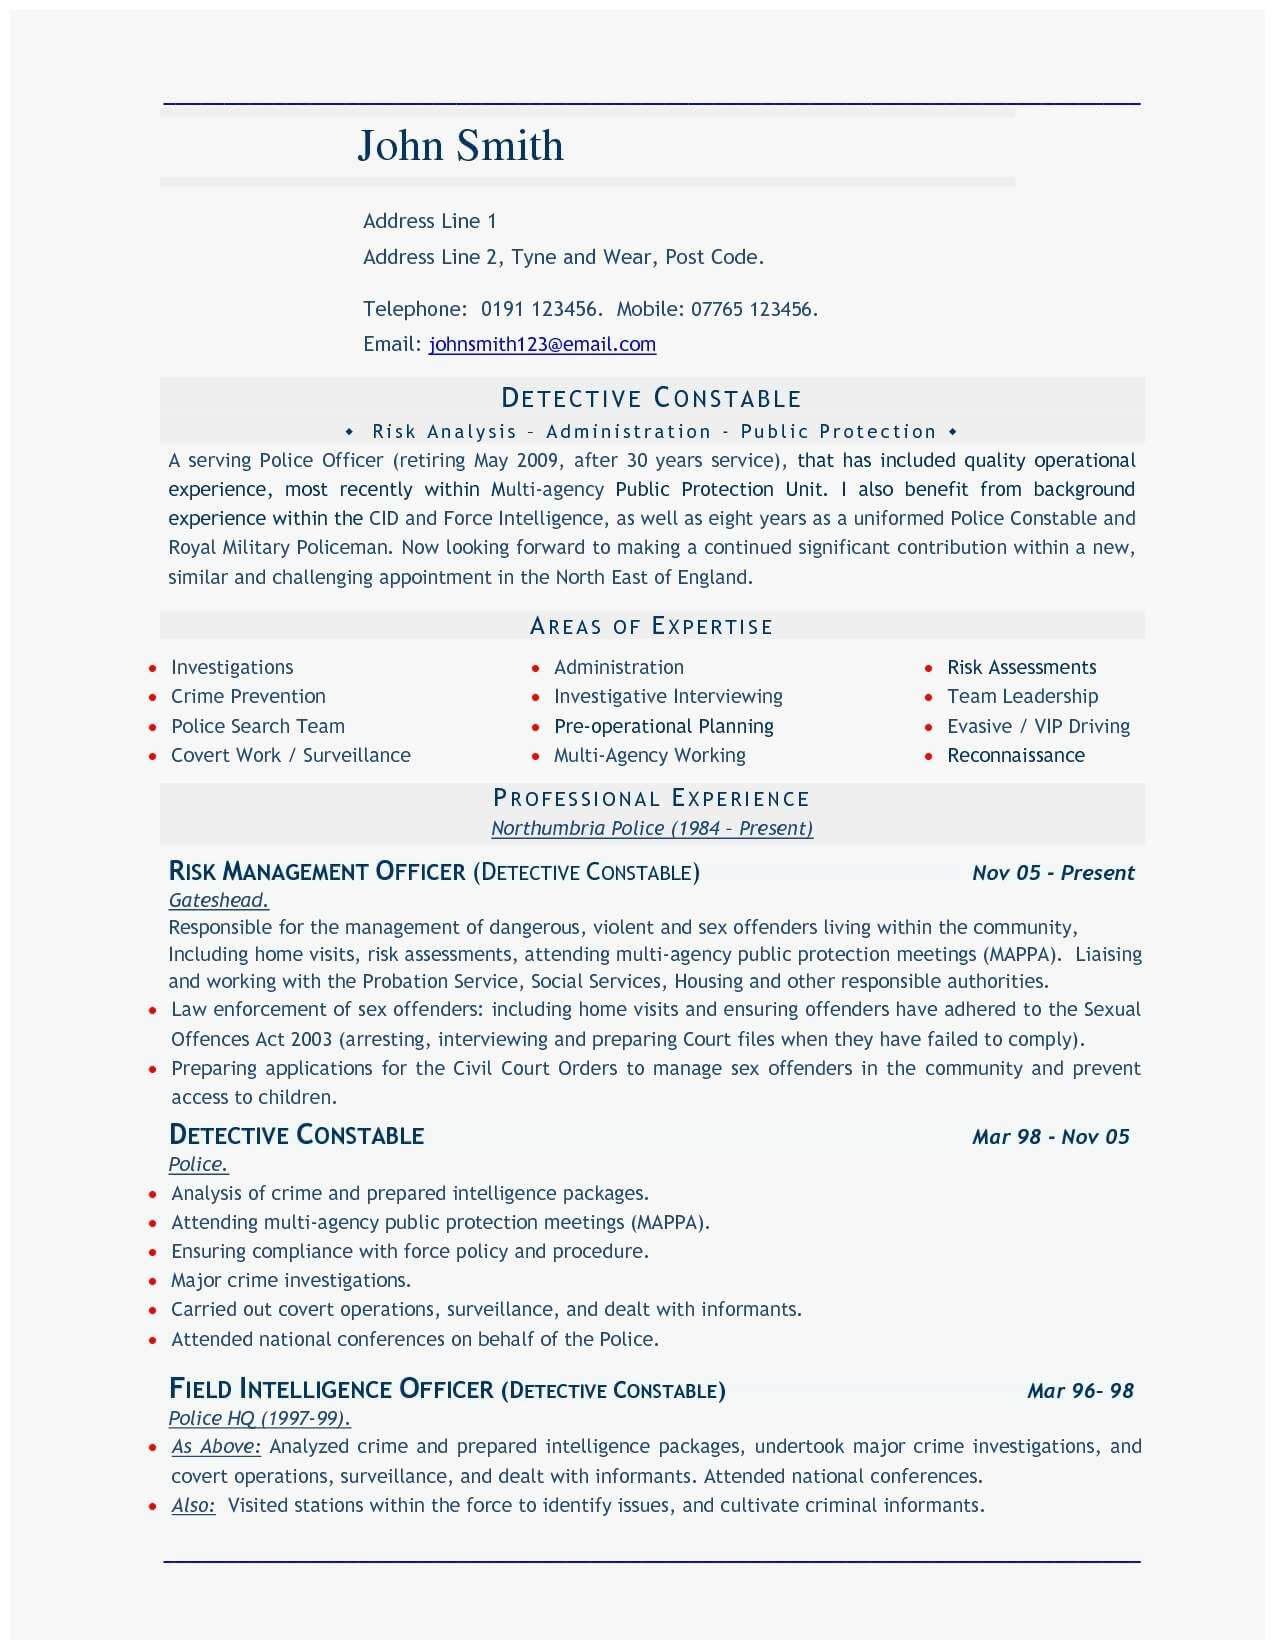 Resume Templates Word 2010 Fabulous Cv Format In Ms Word Intended For Resume Templates Word 2010